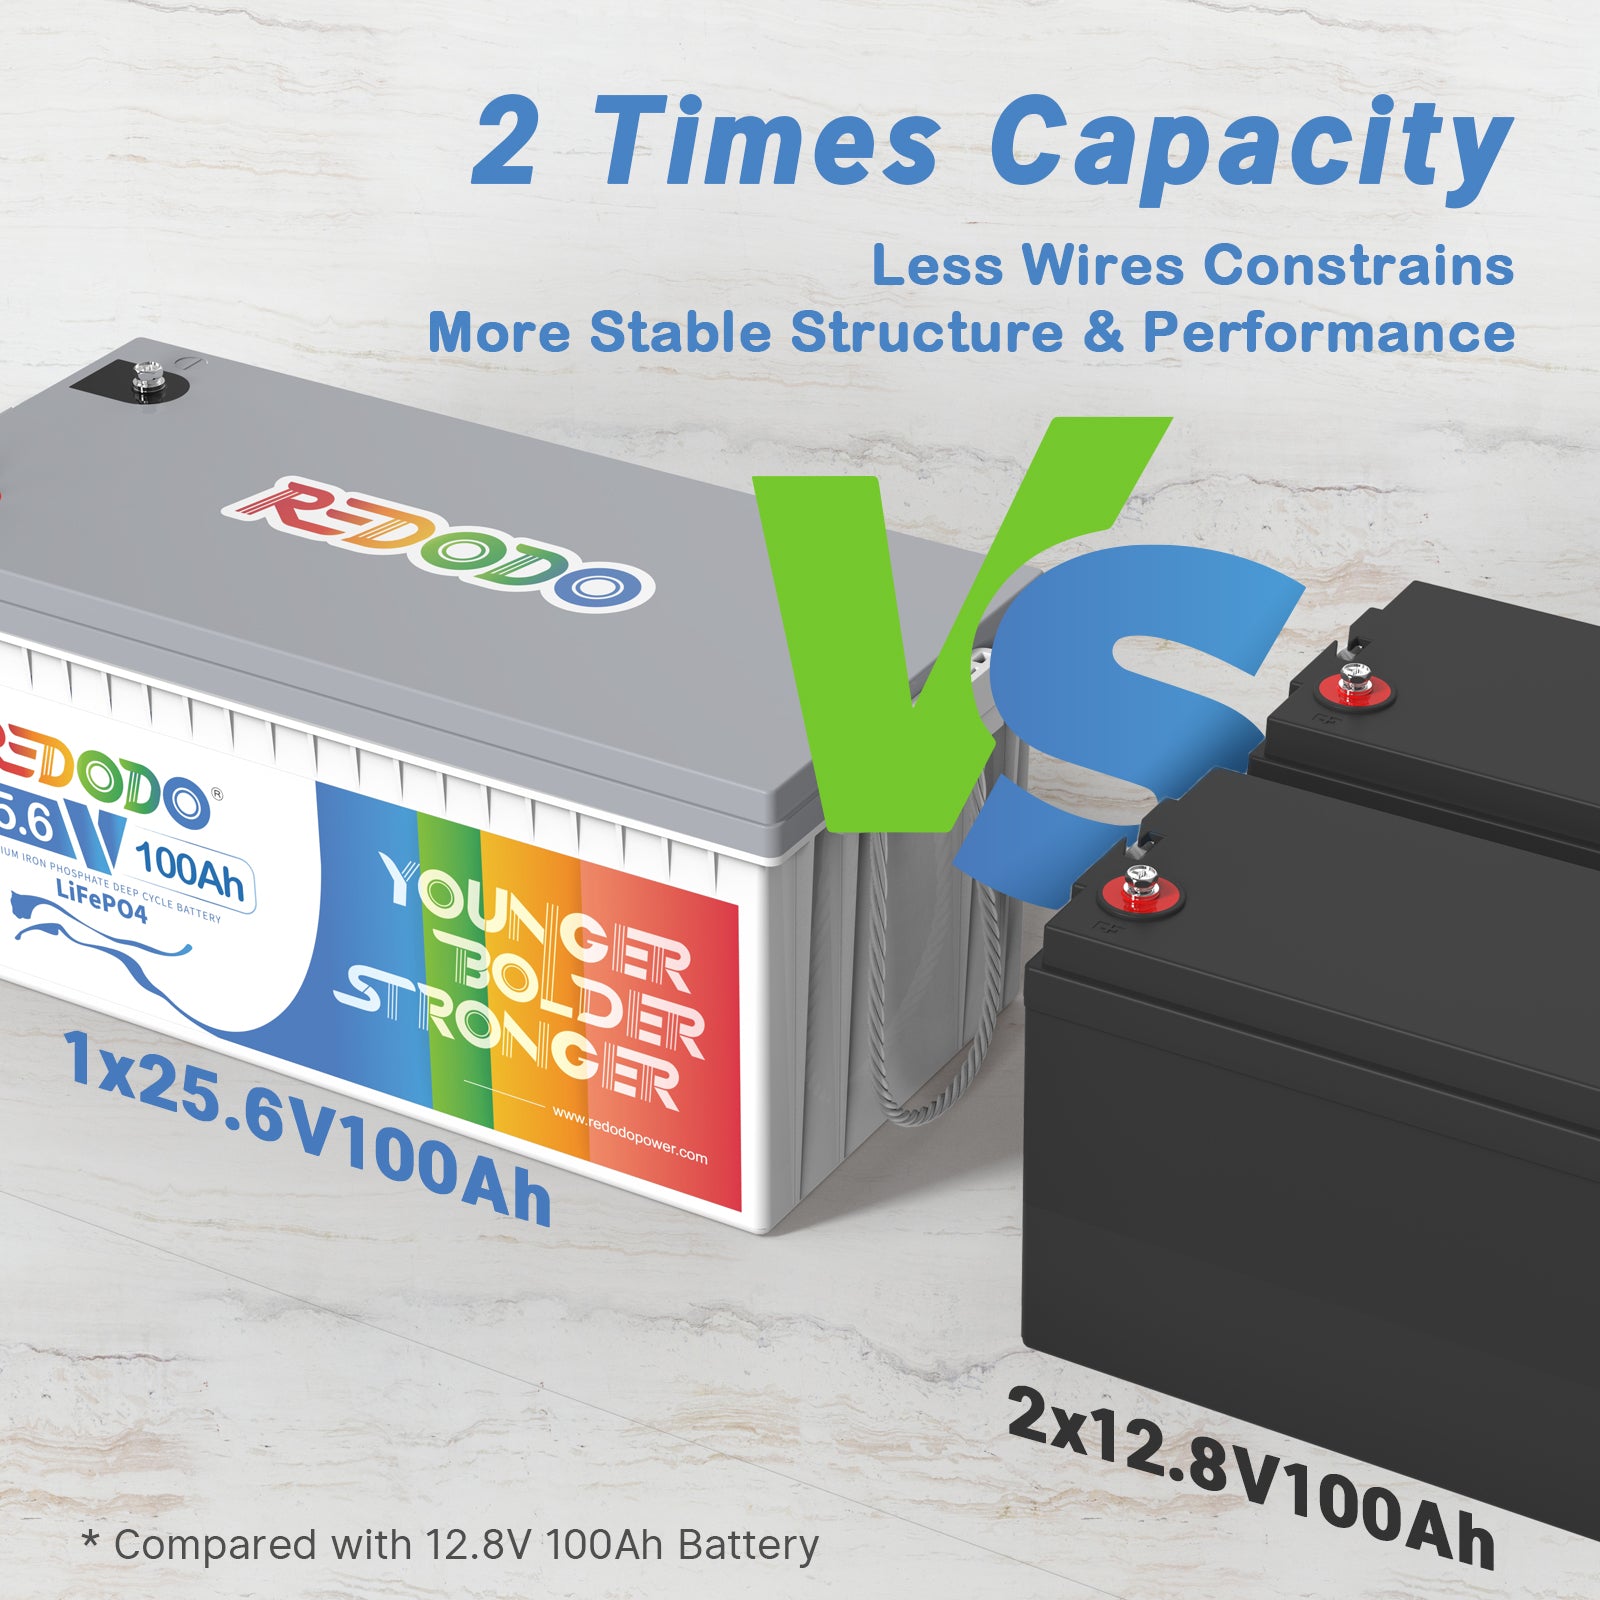 [Only C$806.39]Redodo 24V 100Ah LiFePO4 Battery | 2.56kWh & 2.56kW